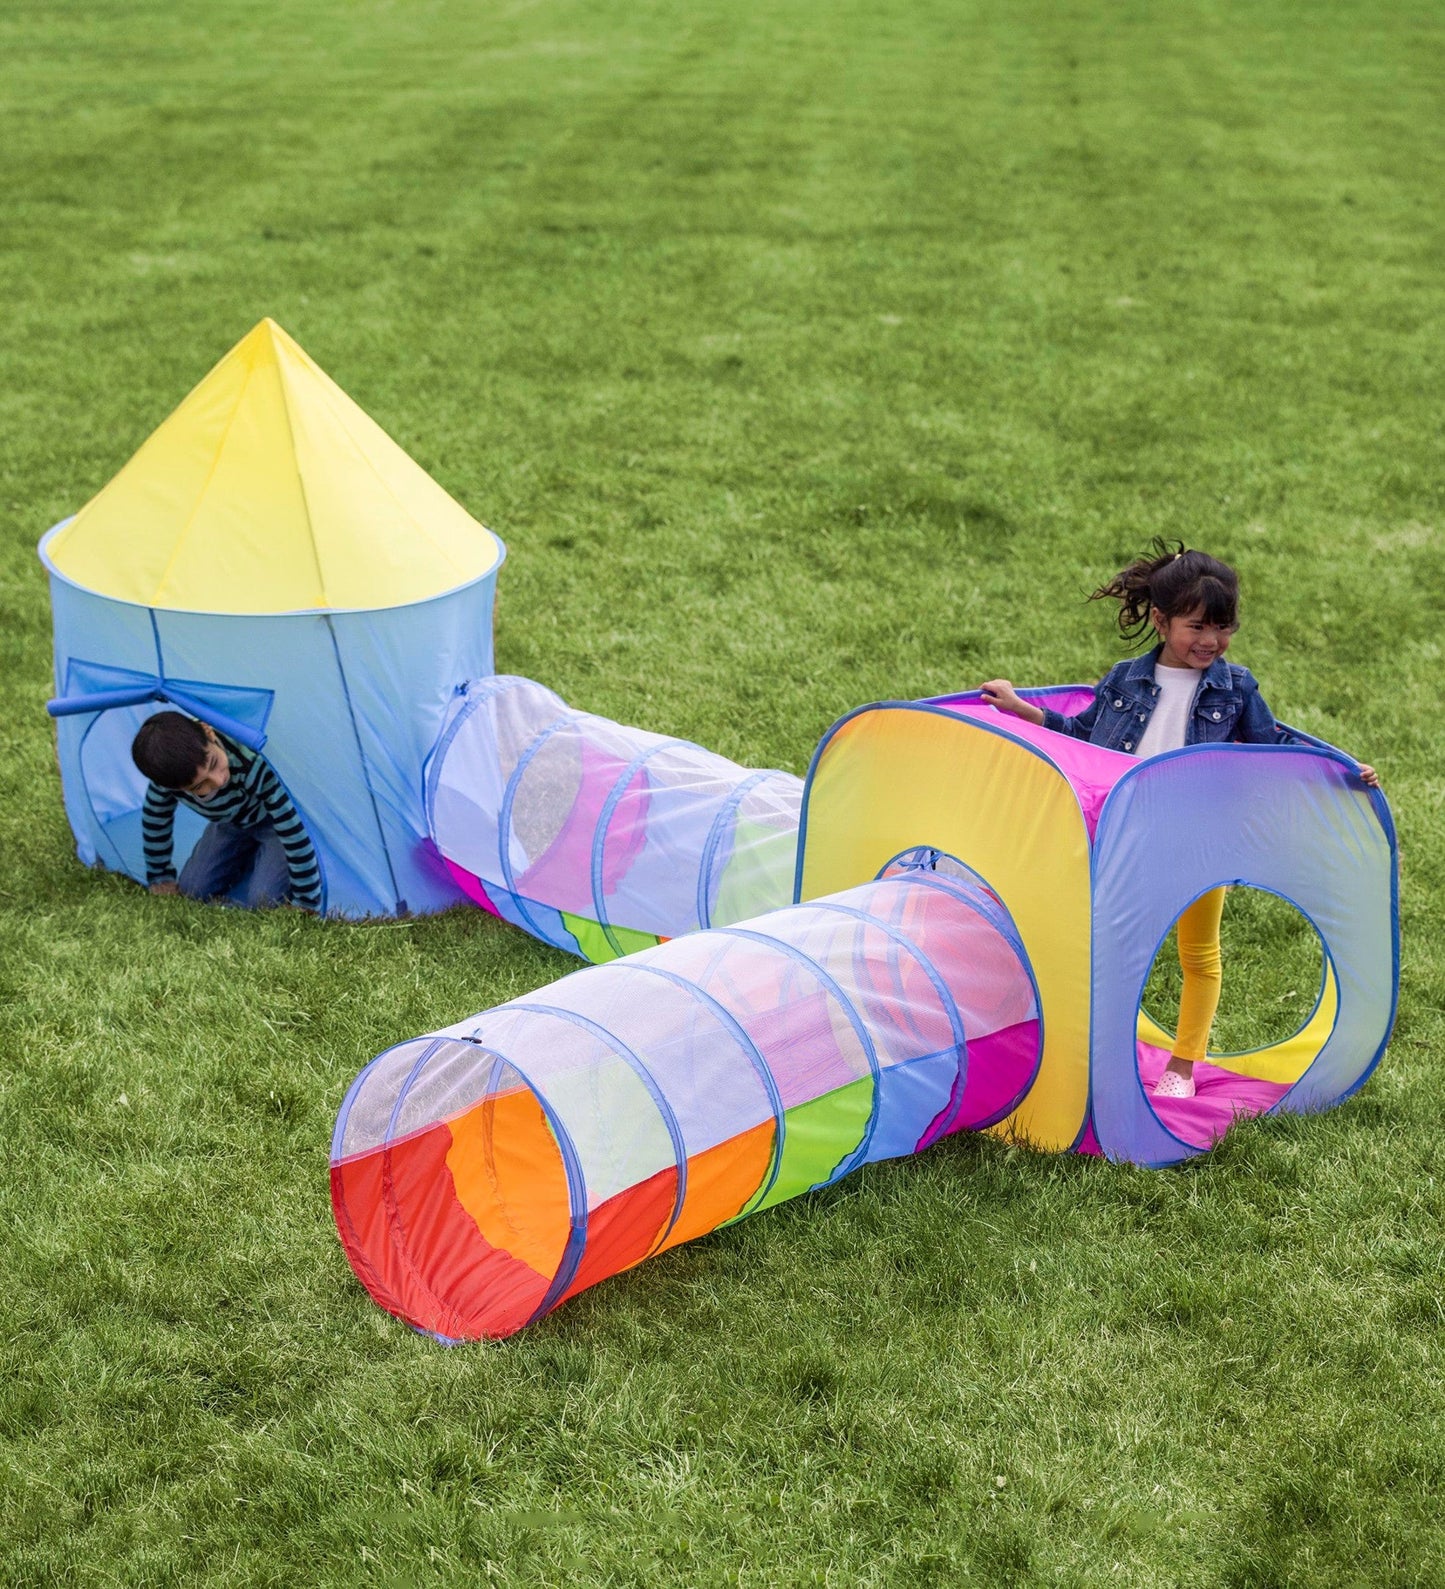 Pop-Up Rainbow Play Tents and Tunnels, Set of 4